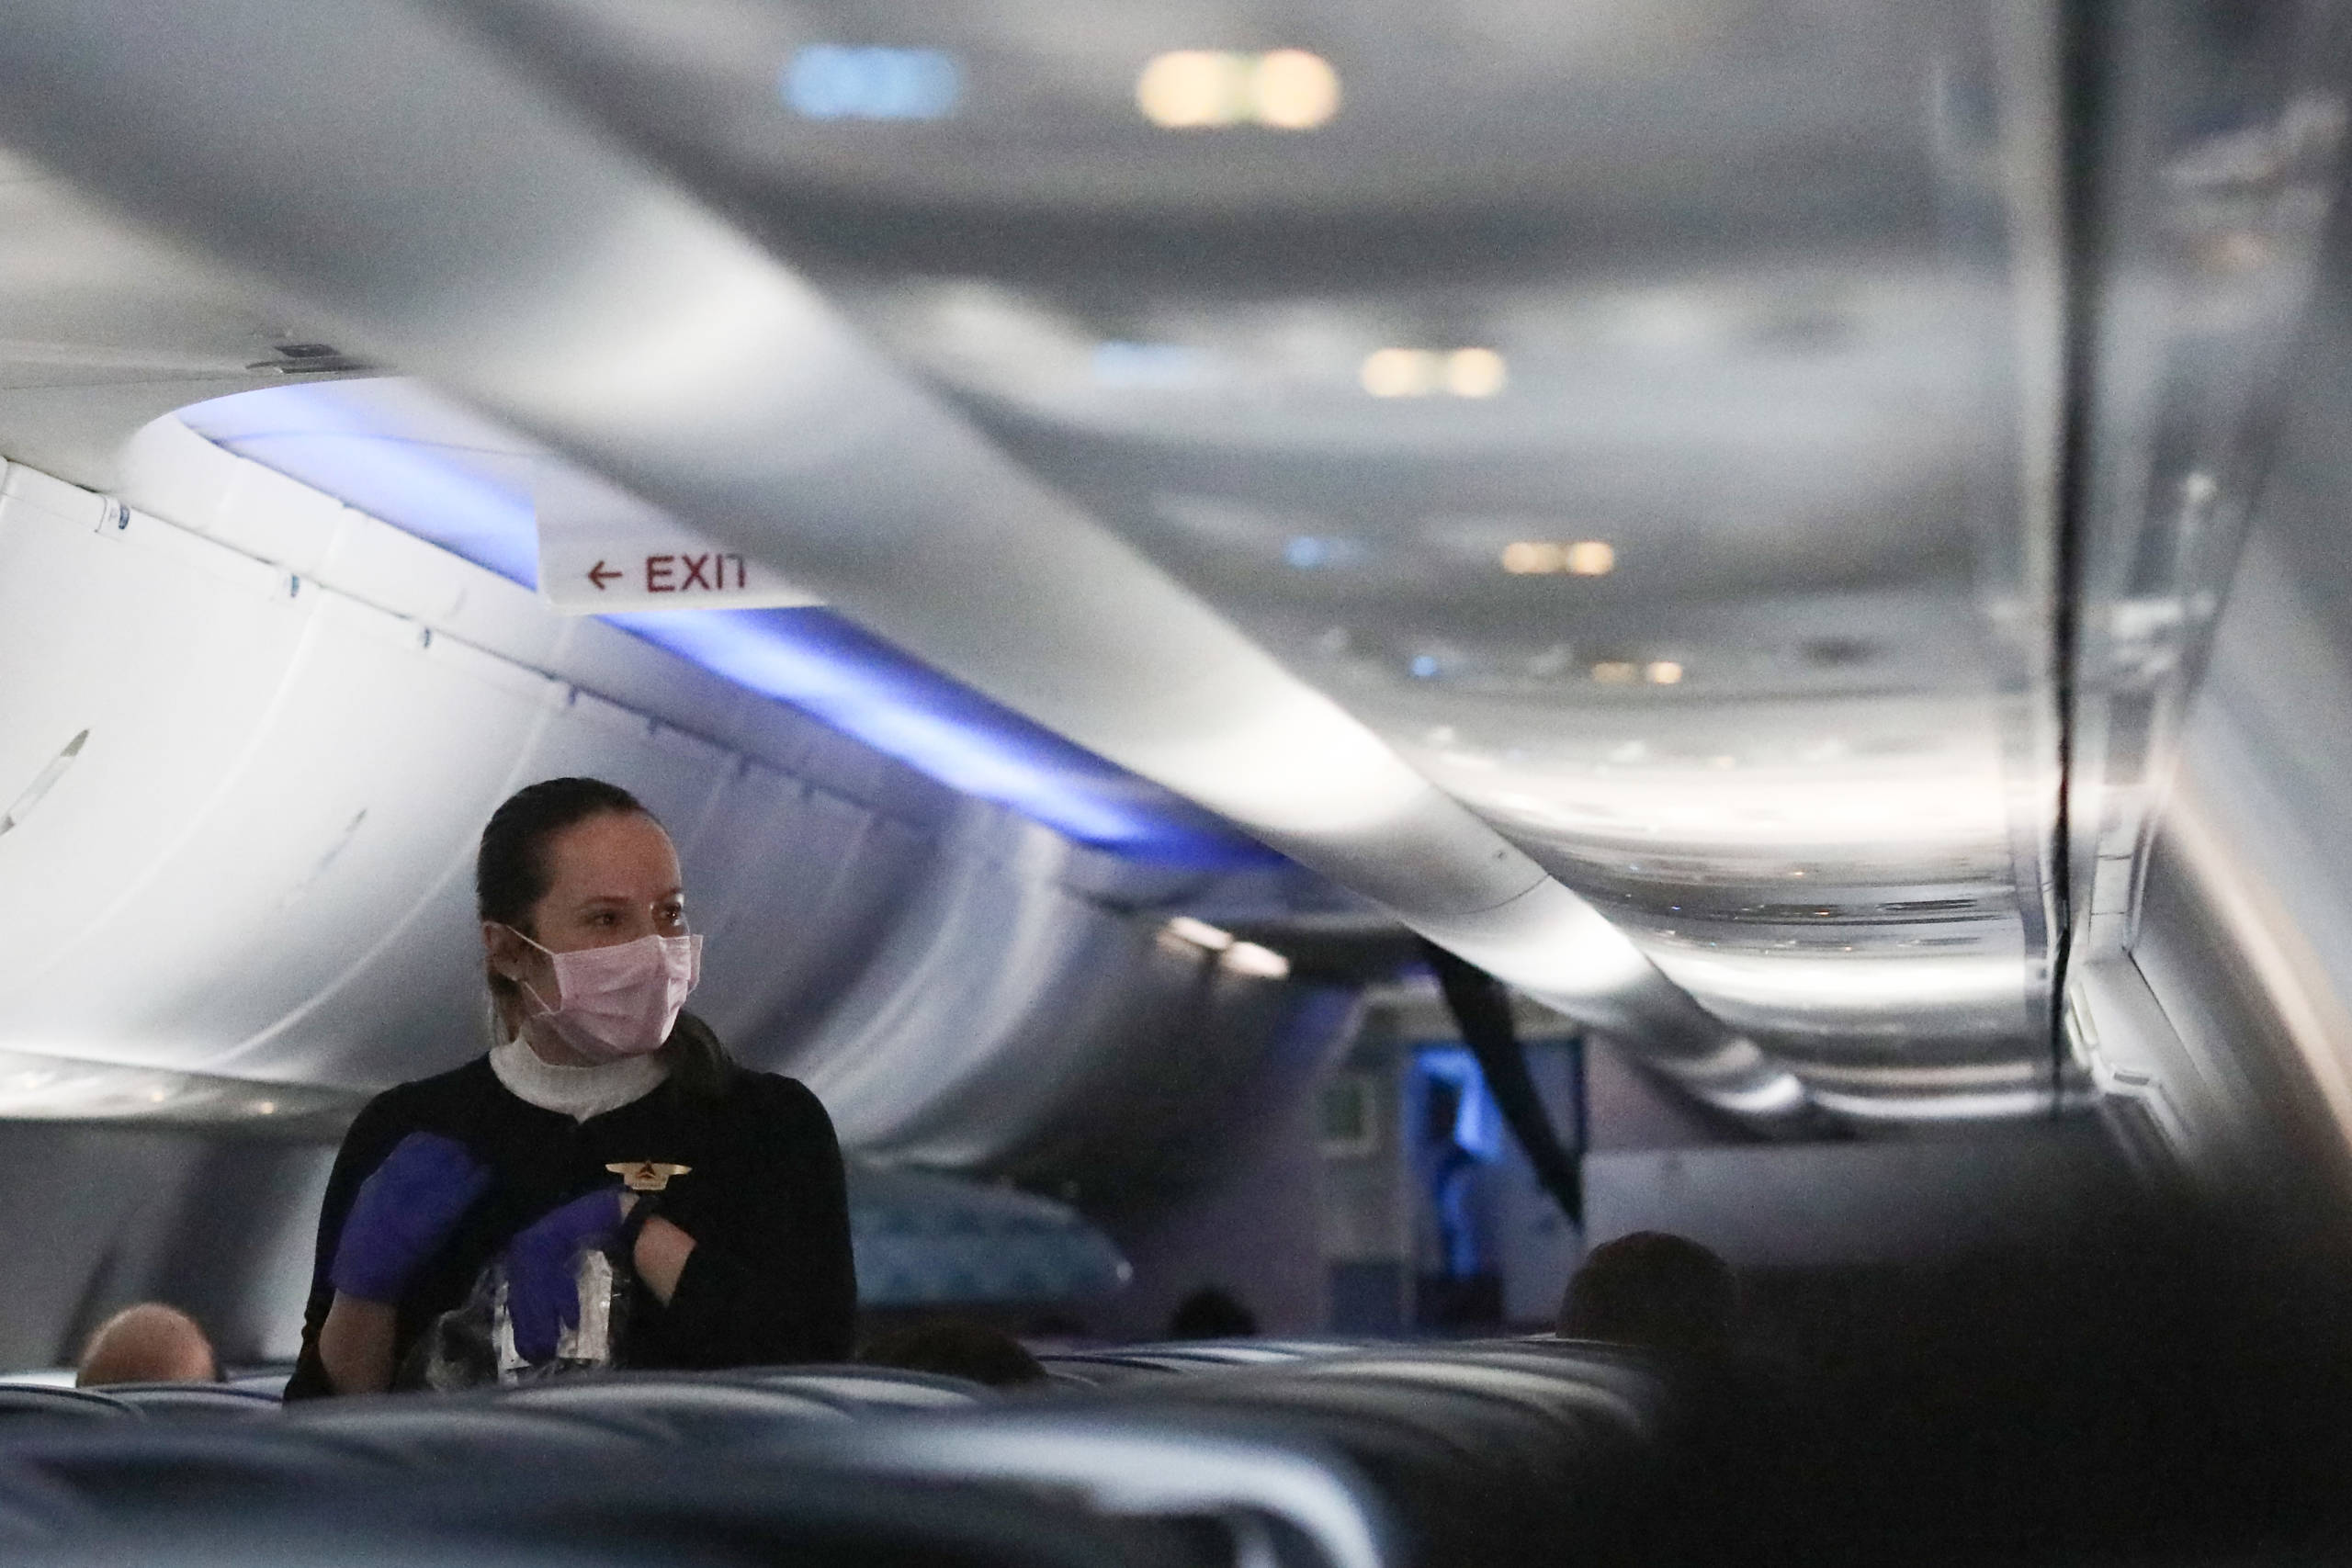 Airline Industry Devastated By Coronavirus Pandemic, As Americans Urged To Shelter At Home